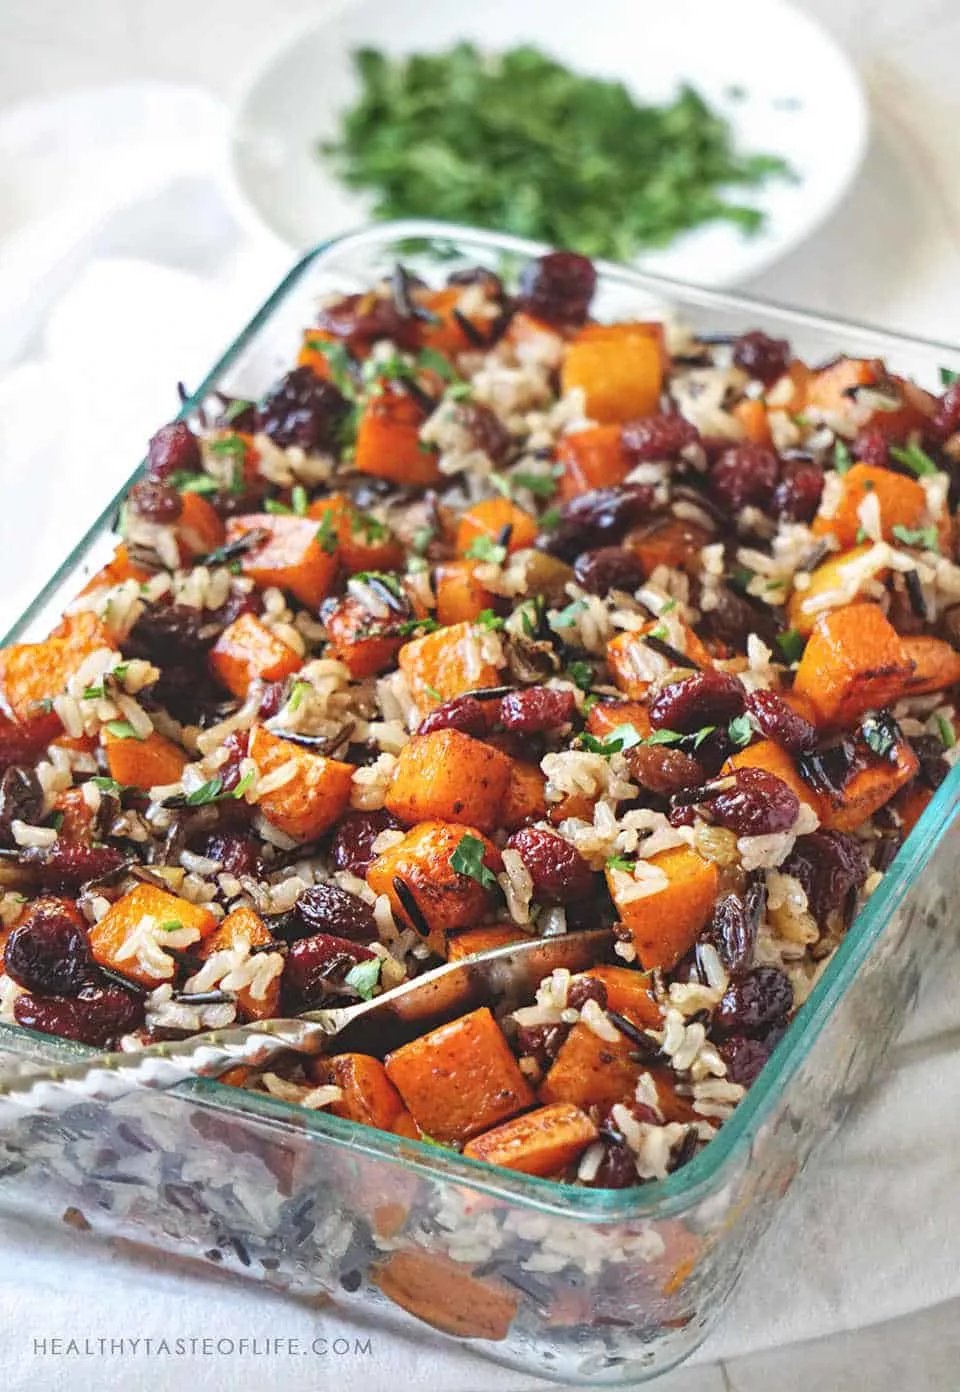 Healthy Butternut Squash Casserole with sweet potatoes and rice finished with a sweet balsamic sauce, perfect as a side dish or meal. This vegan butternut squash casserole is easy to make and stores well. 